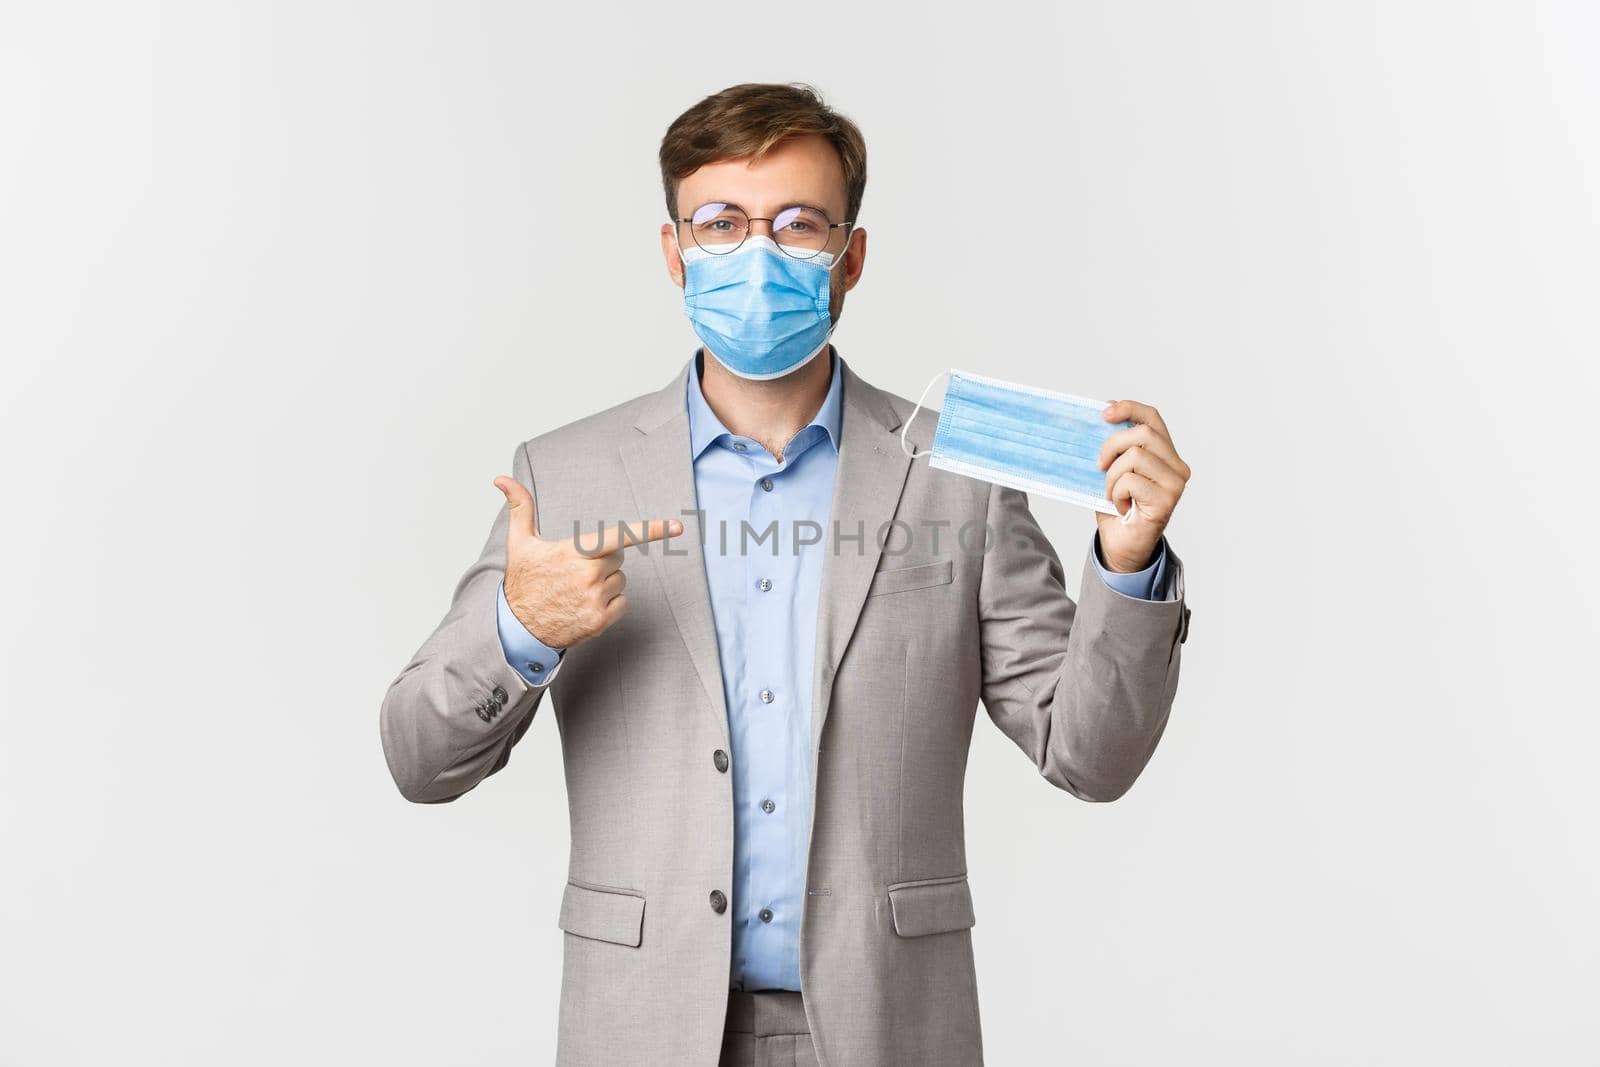 Concept of work, covid-19 and social distancing. Image of male employer in gray suit, encourage using medical mask in office, standing over white background.